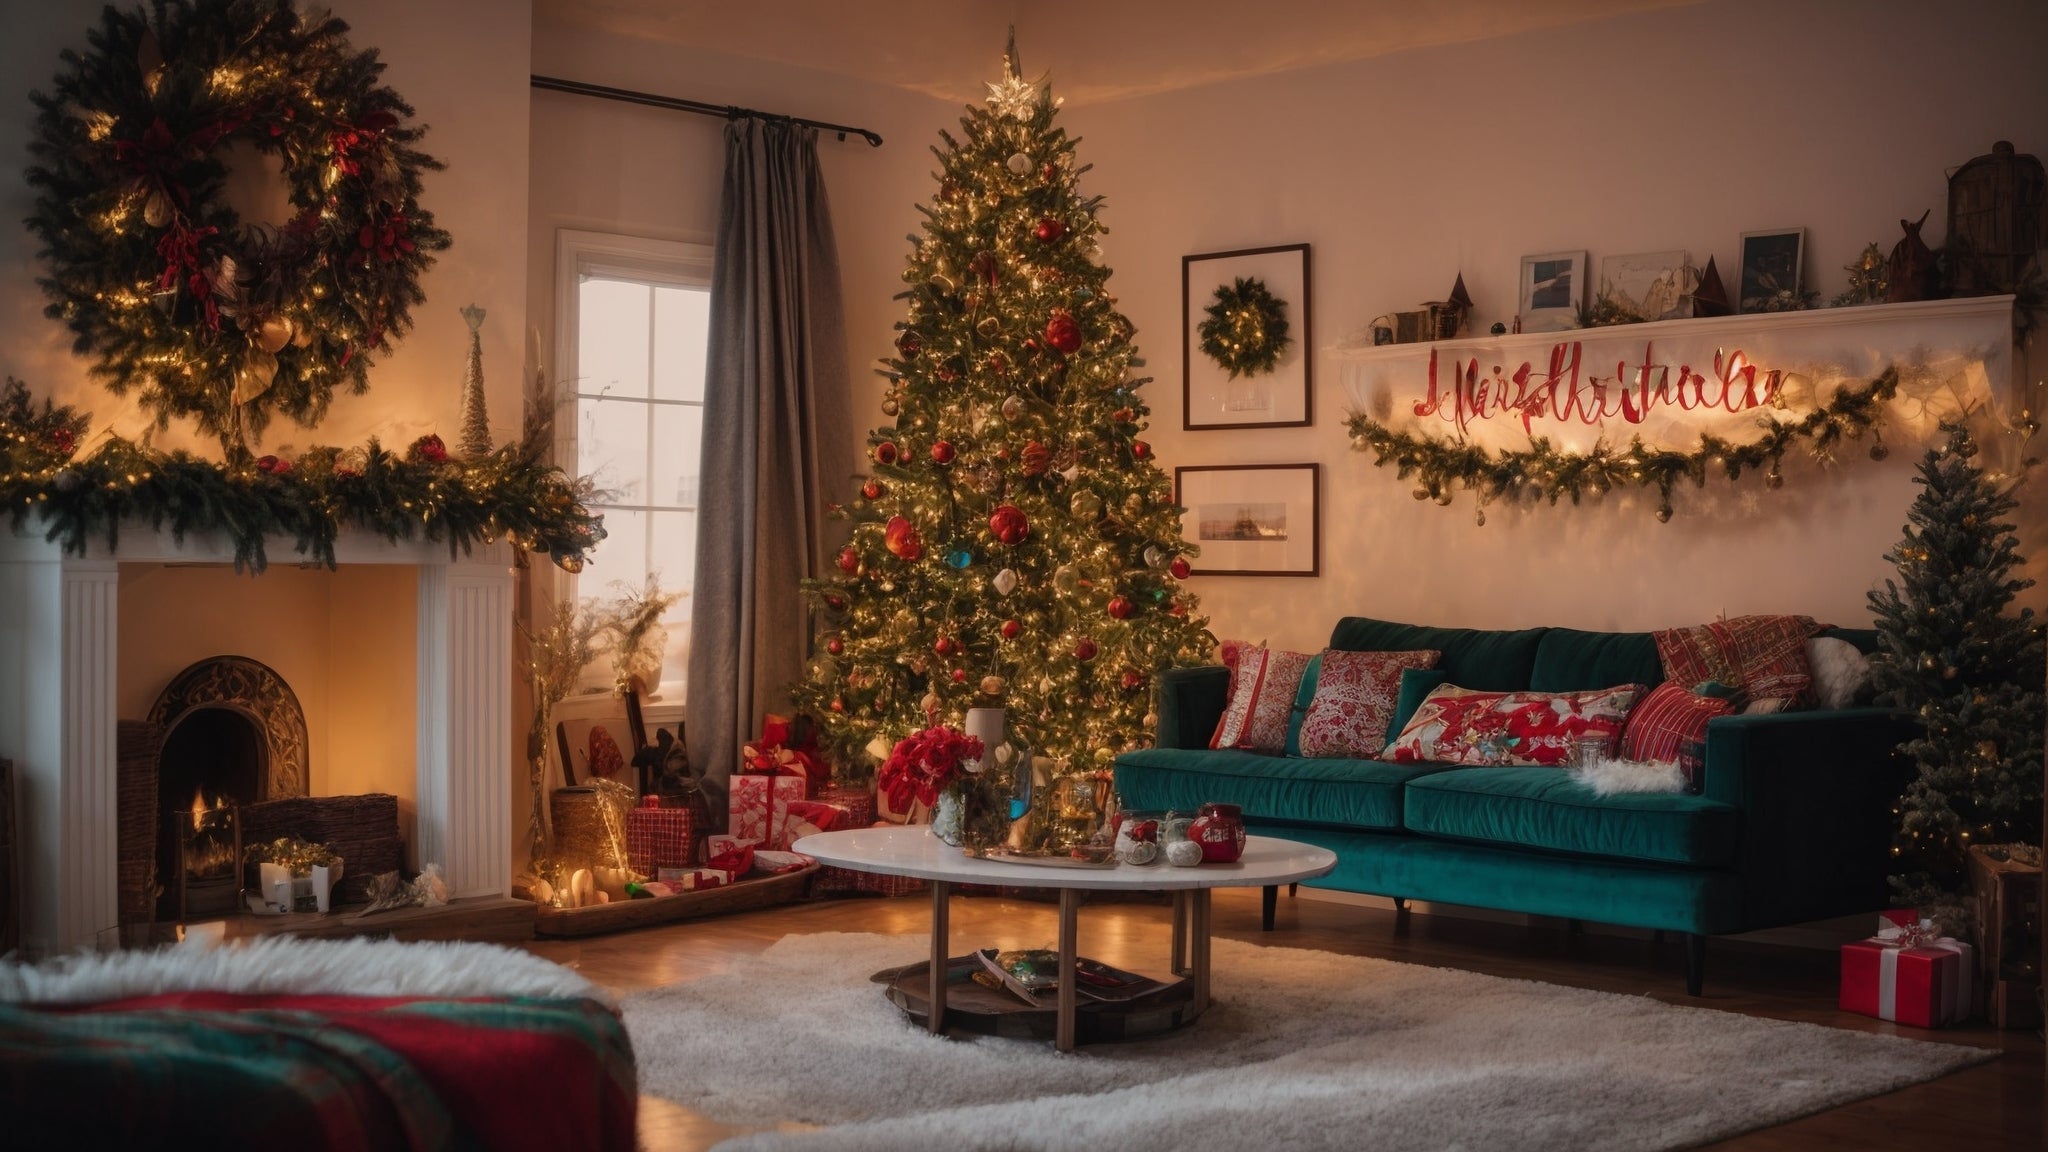 How to Decorate Your House for Christmas with Creative Ideas